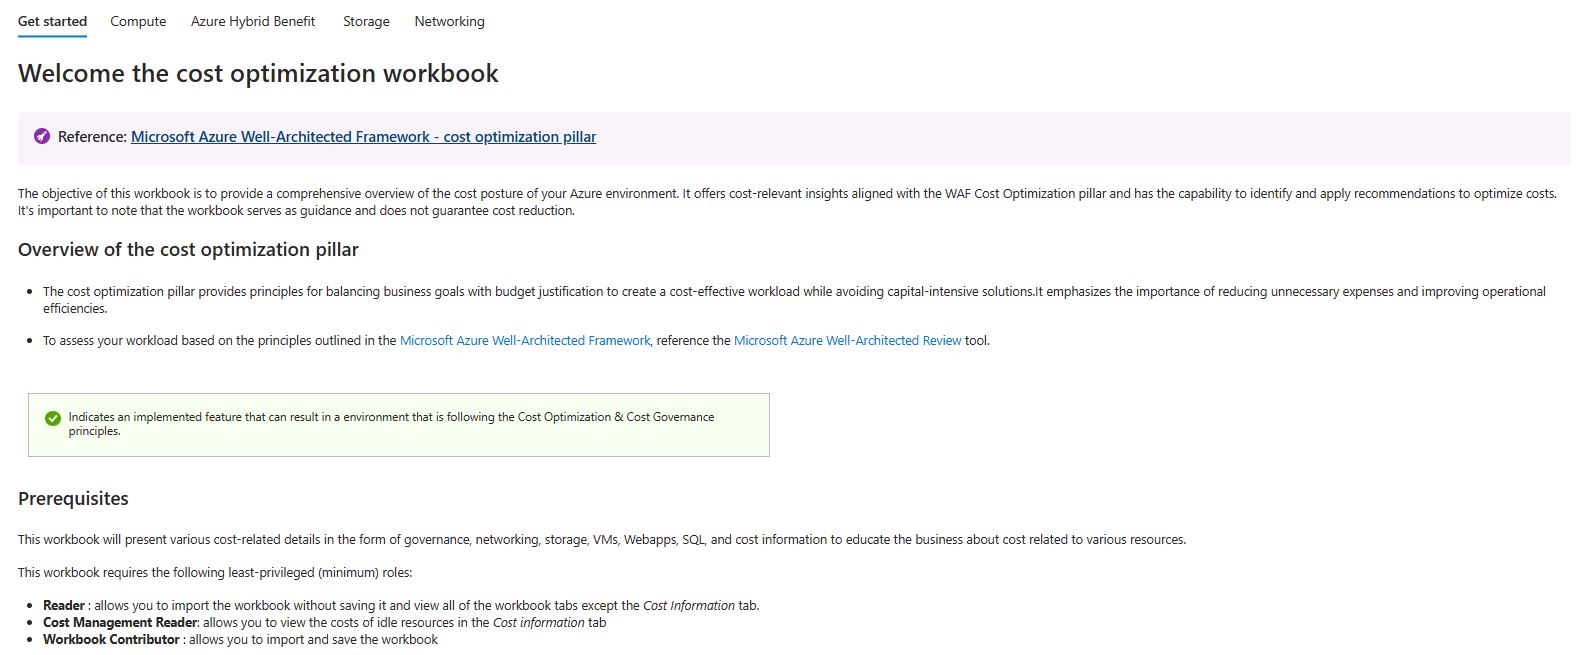 Cost Optimization workbook Welcome page showing all the other tabs.